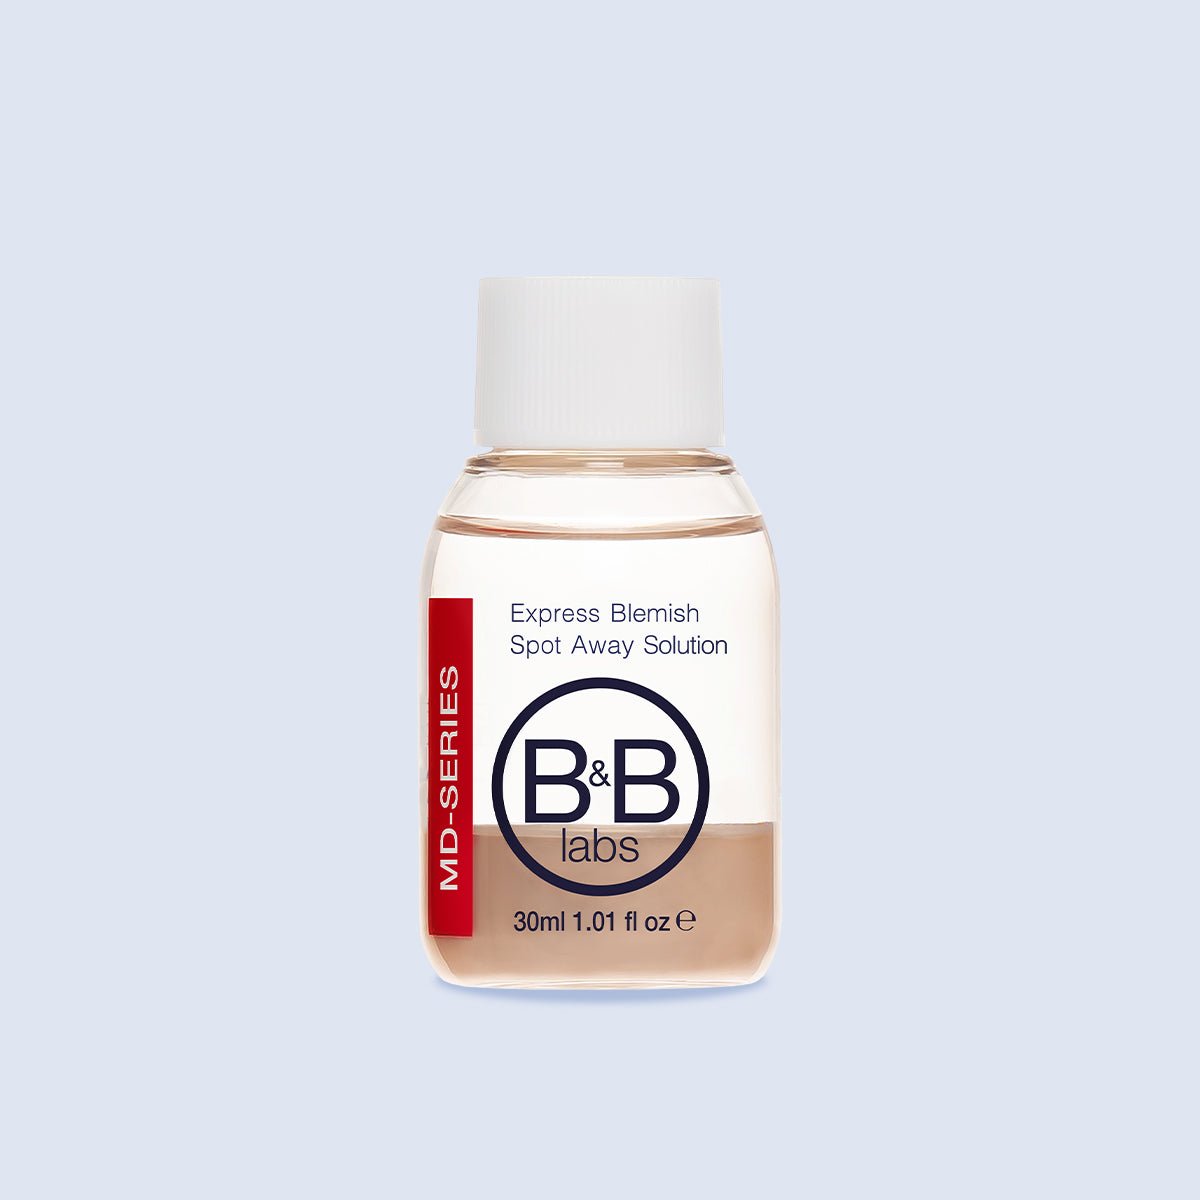 Express Blemish Spot Away Solution - B&B Labs Skin Cosmeceuticals